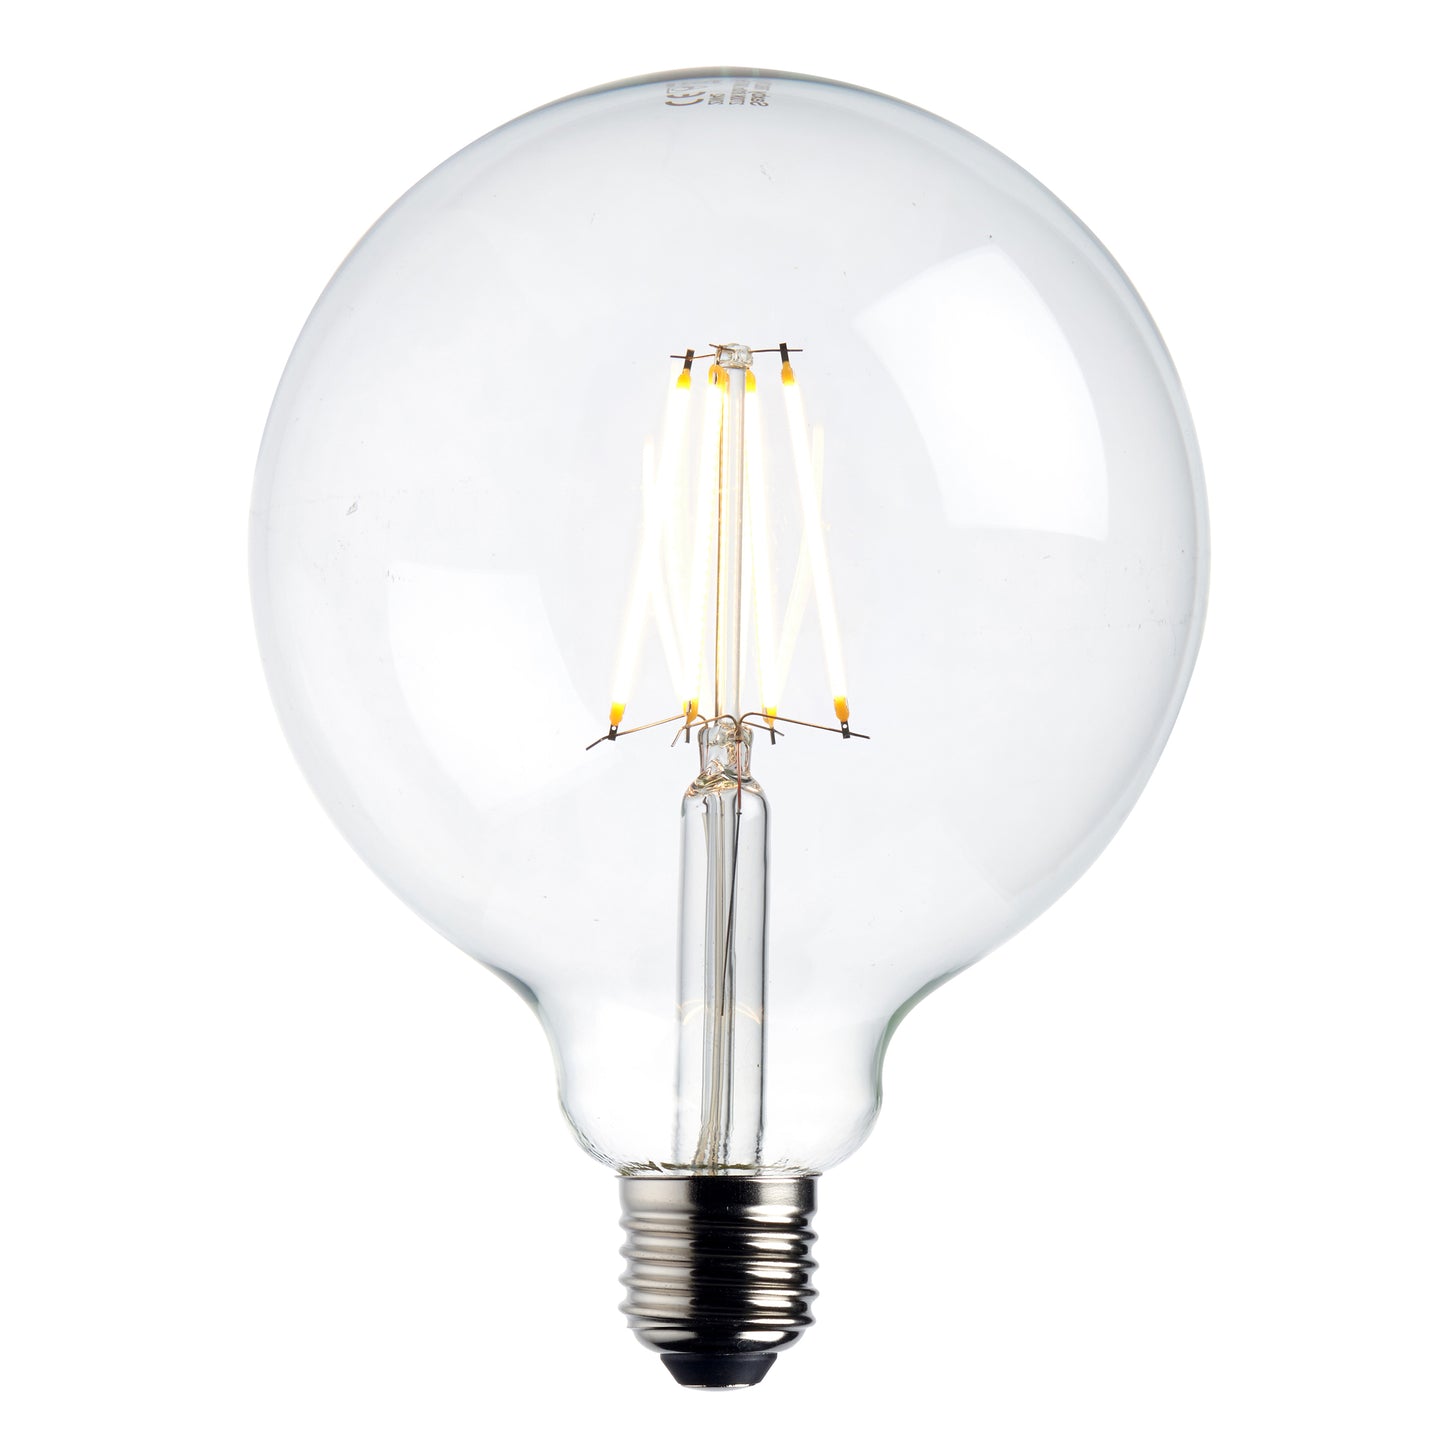 Saxby E27 LED filament globe dimmable 125mm 7W